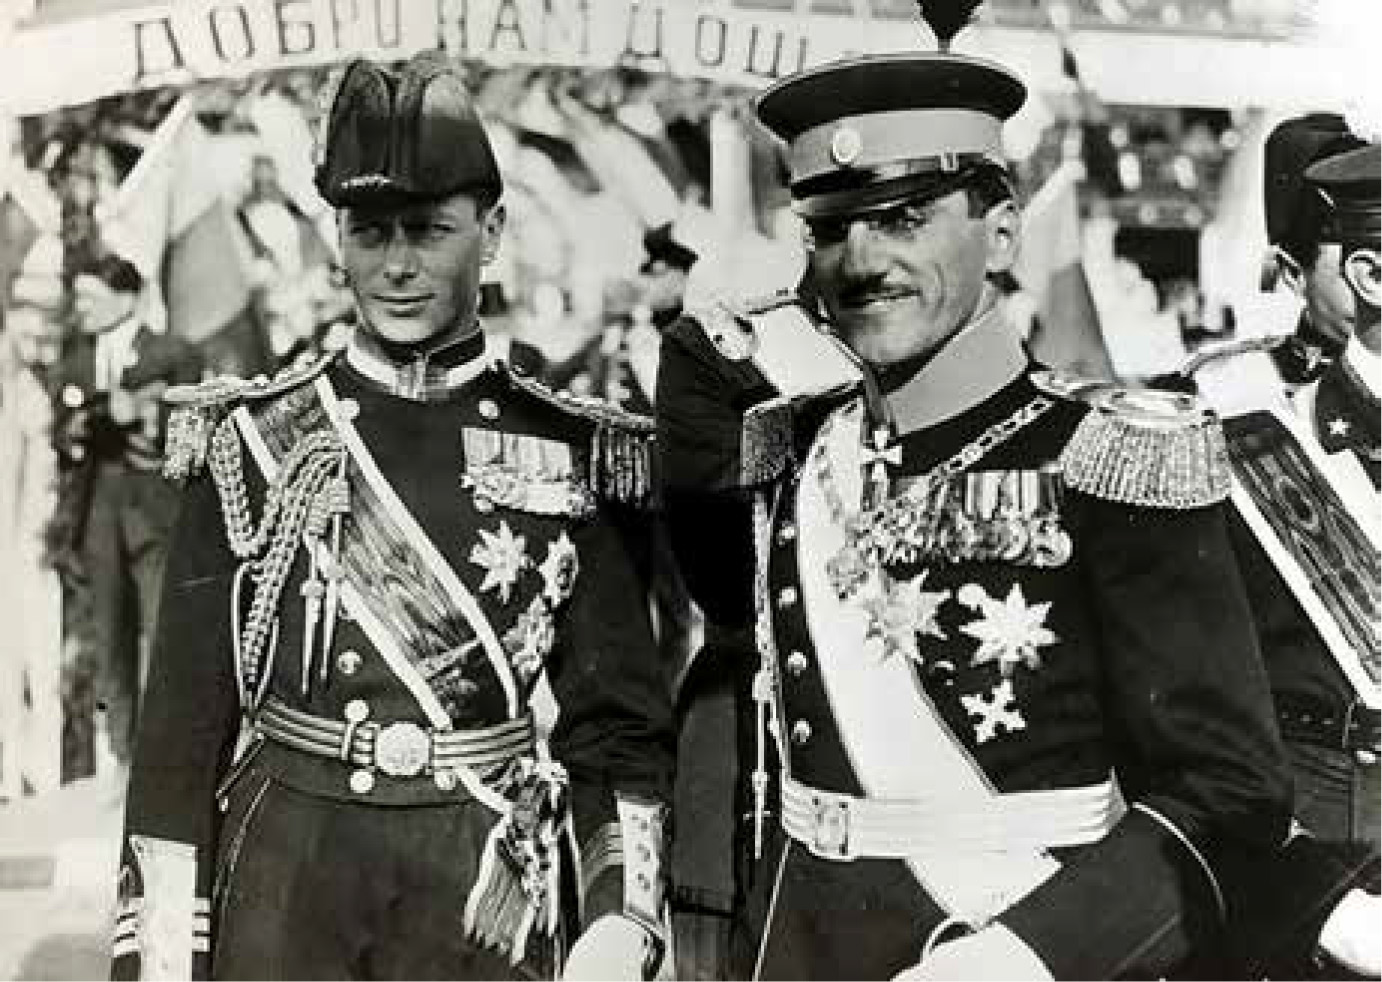 HM King Alexander I and his best man, HRH Prince Albert of Great Britain, on the Royal wedding in Belgrade, June 8th, 1922